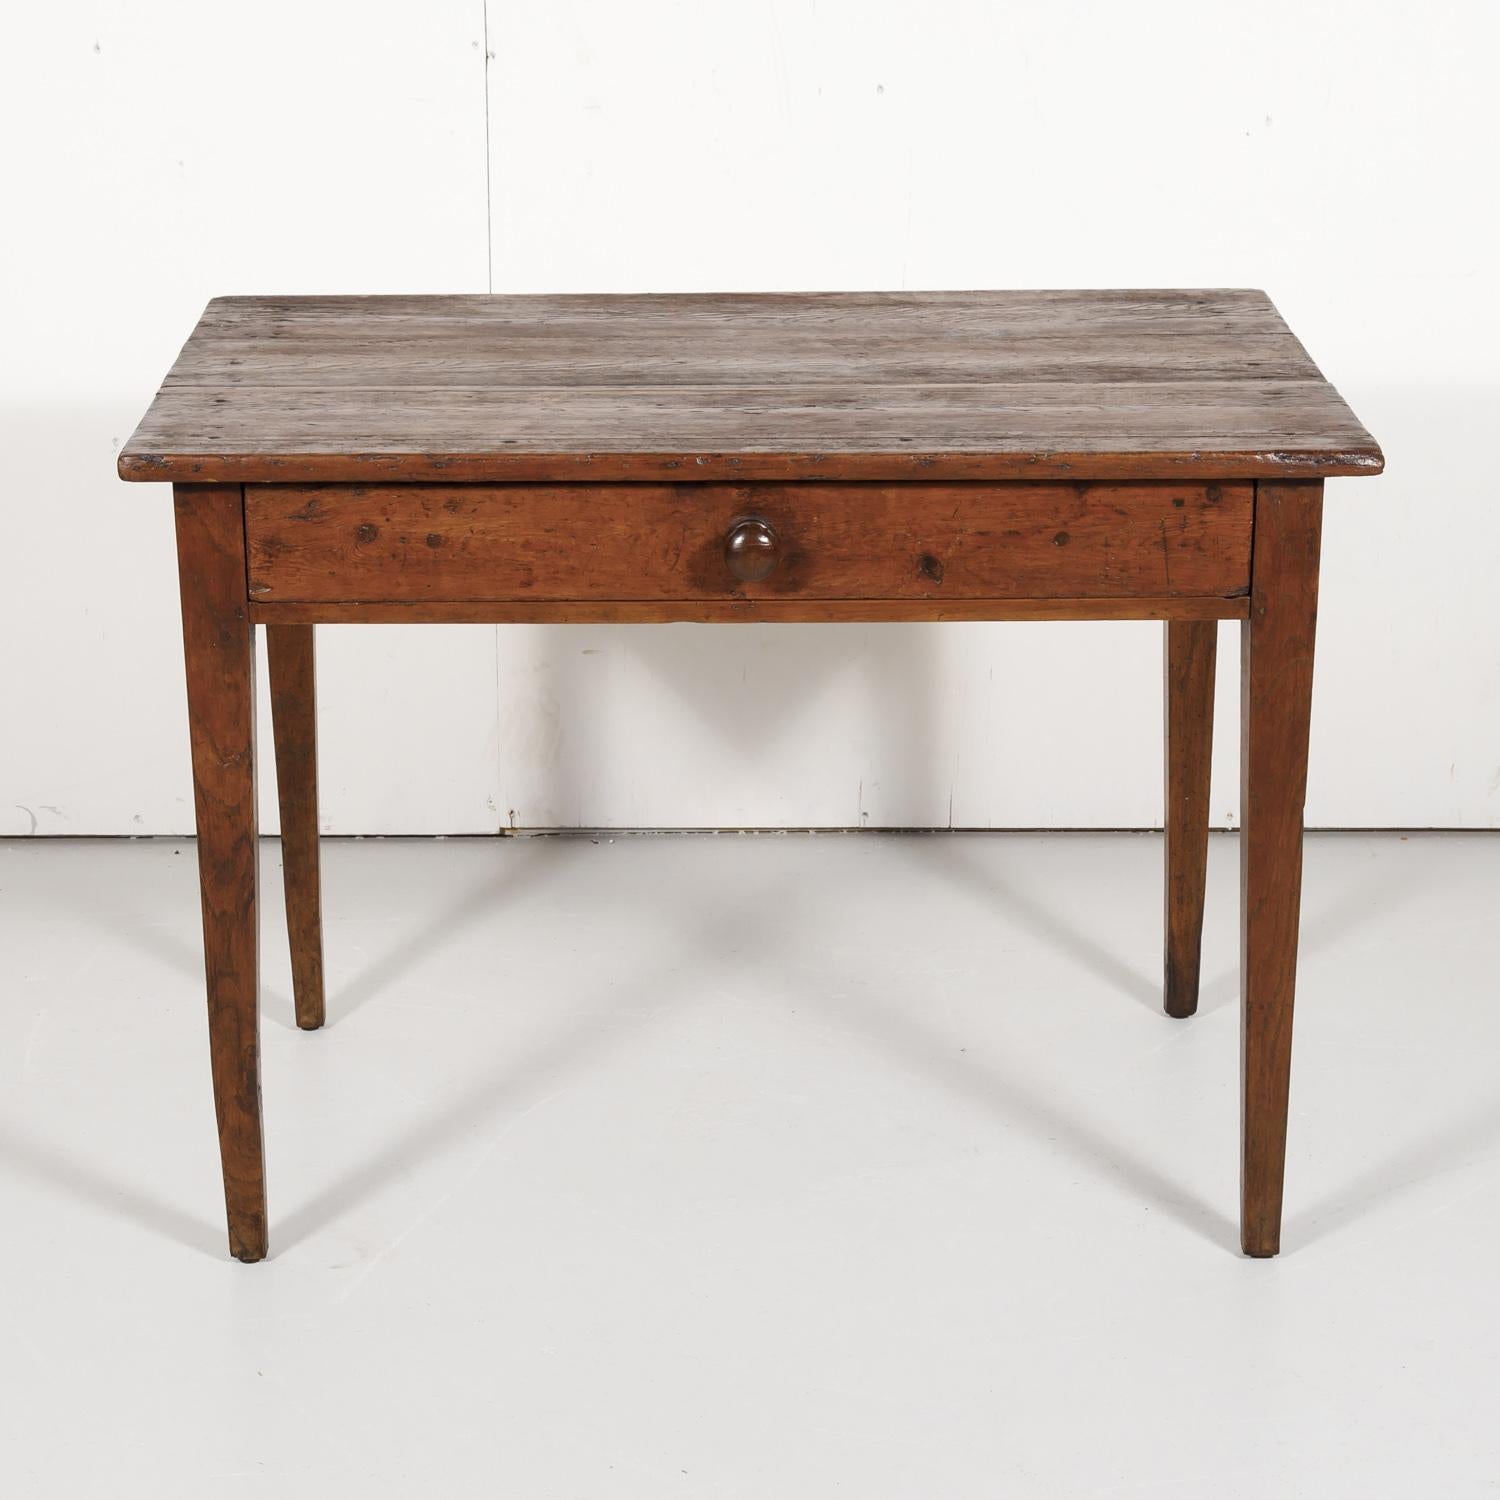 Rustic Early 19th Century Primitive French Country Side Table or Work Table